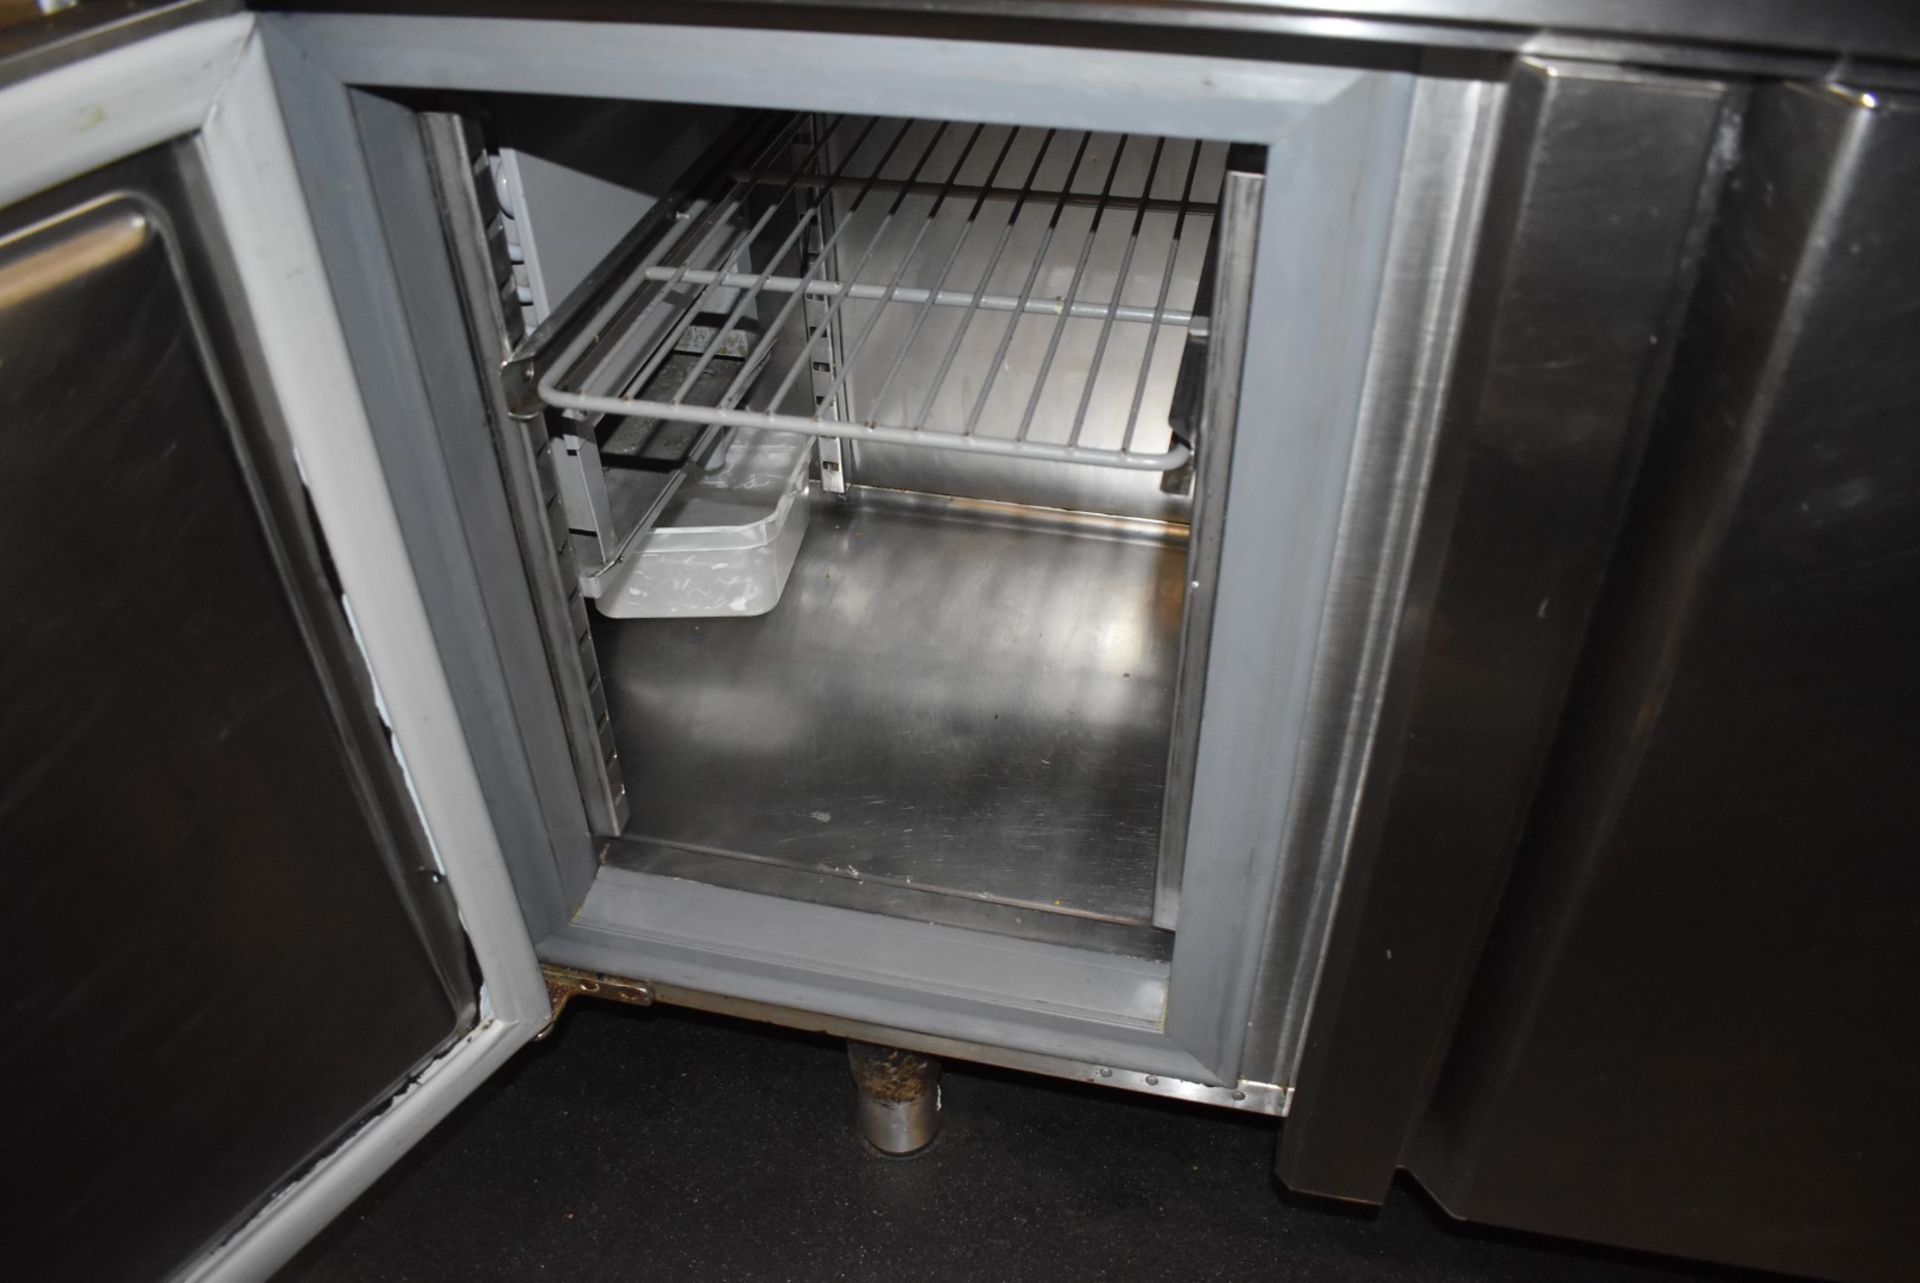 1 x Infrico 4 Door Countertop Refrigerator With Passthrough Shelves and Ticket Rails - Image 12 of 18